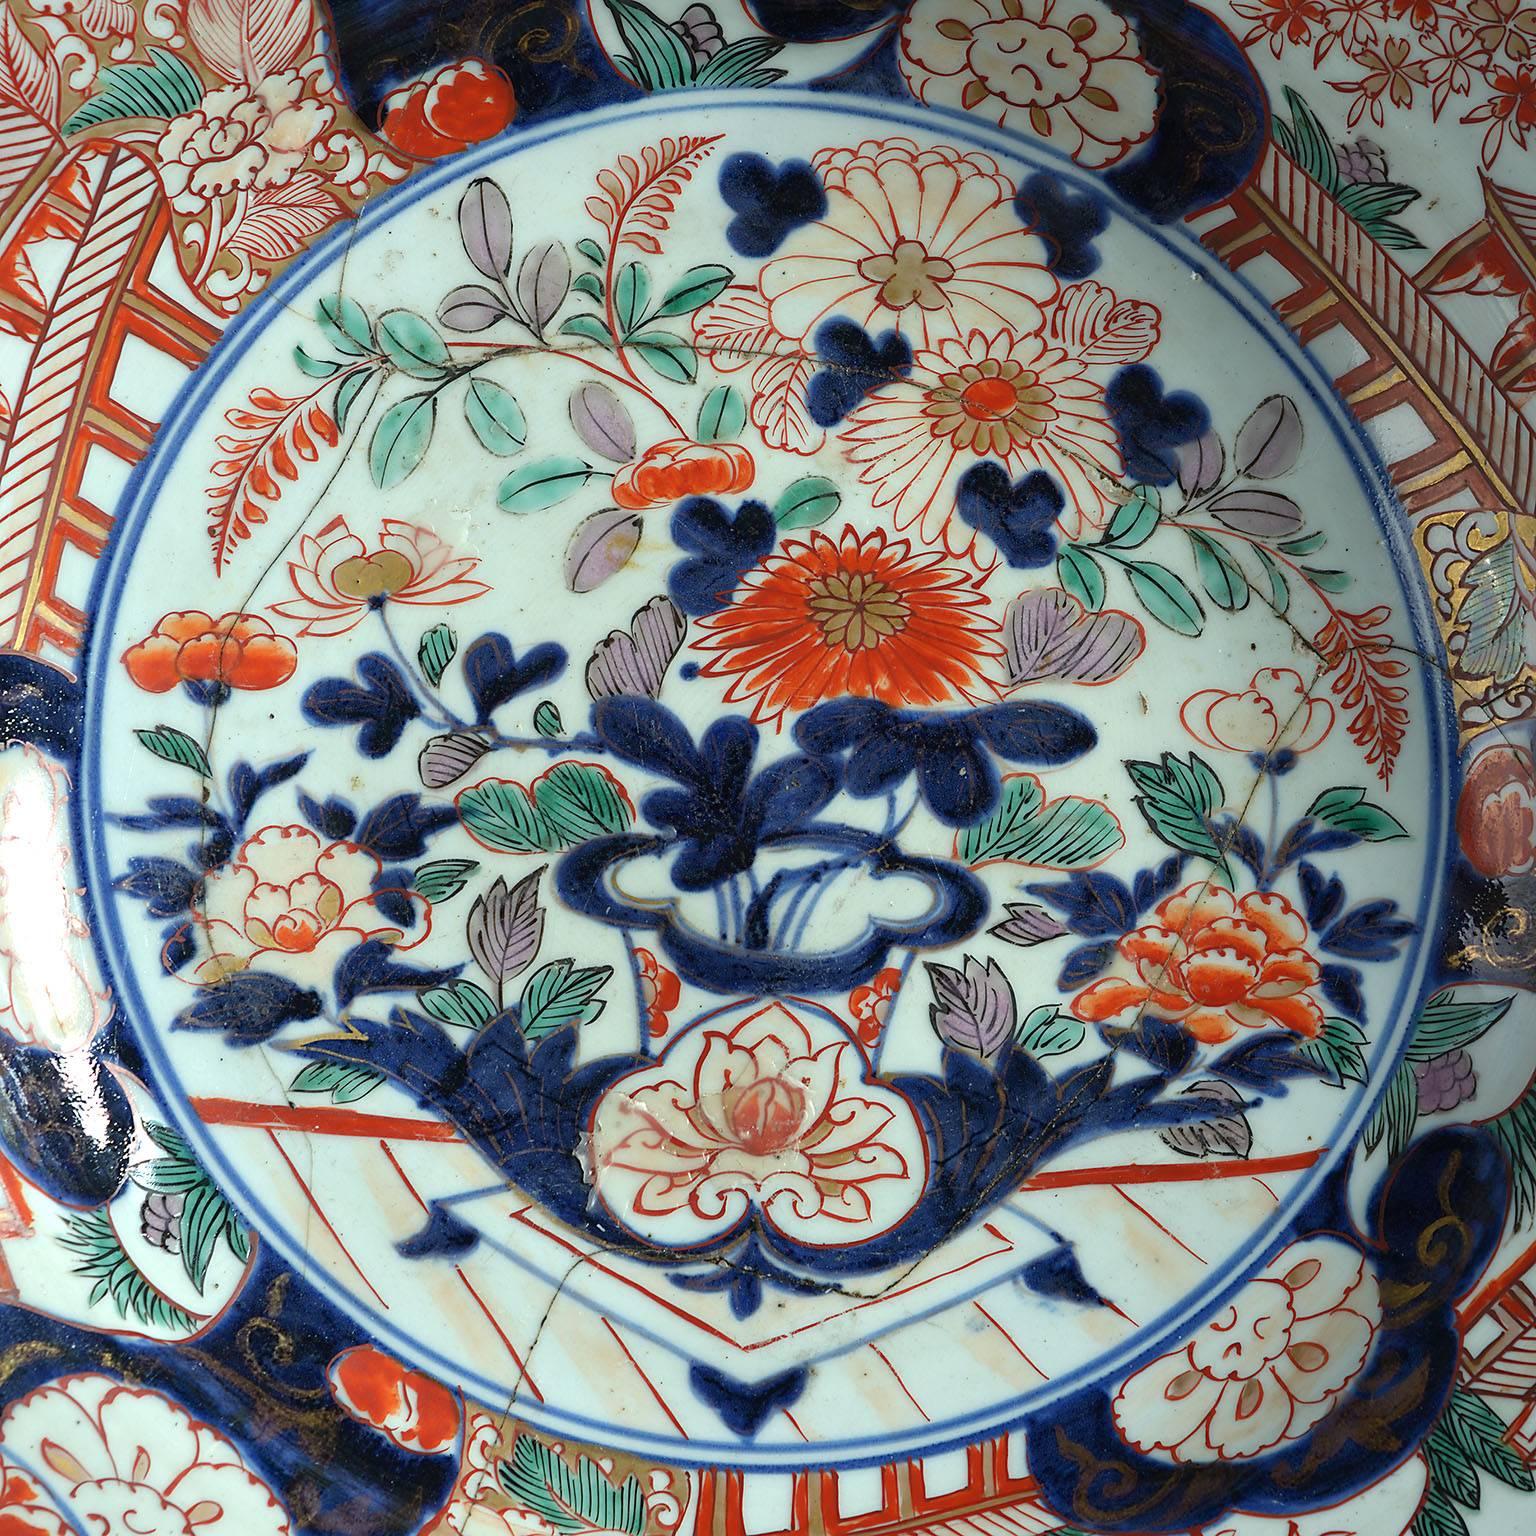 A fine mid-18th century overscale Imari charger decorated with foliate designs and pavilions. With restorations.